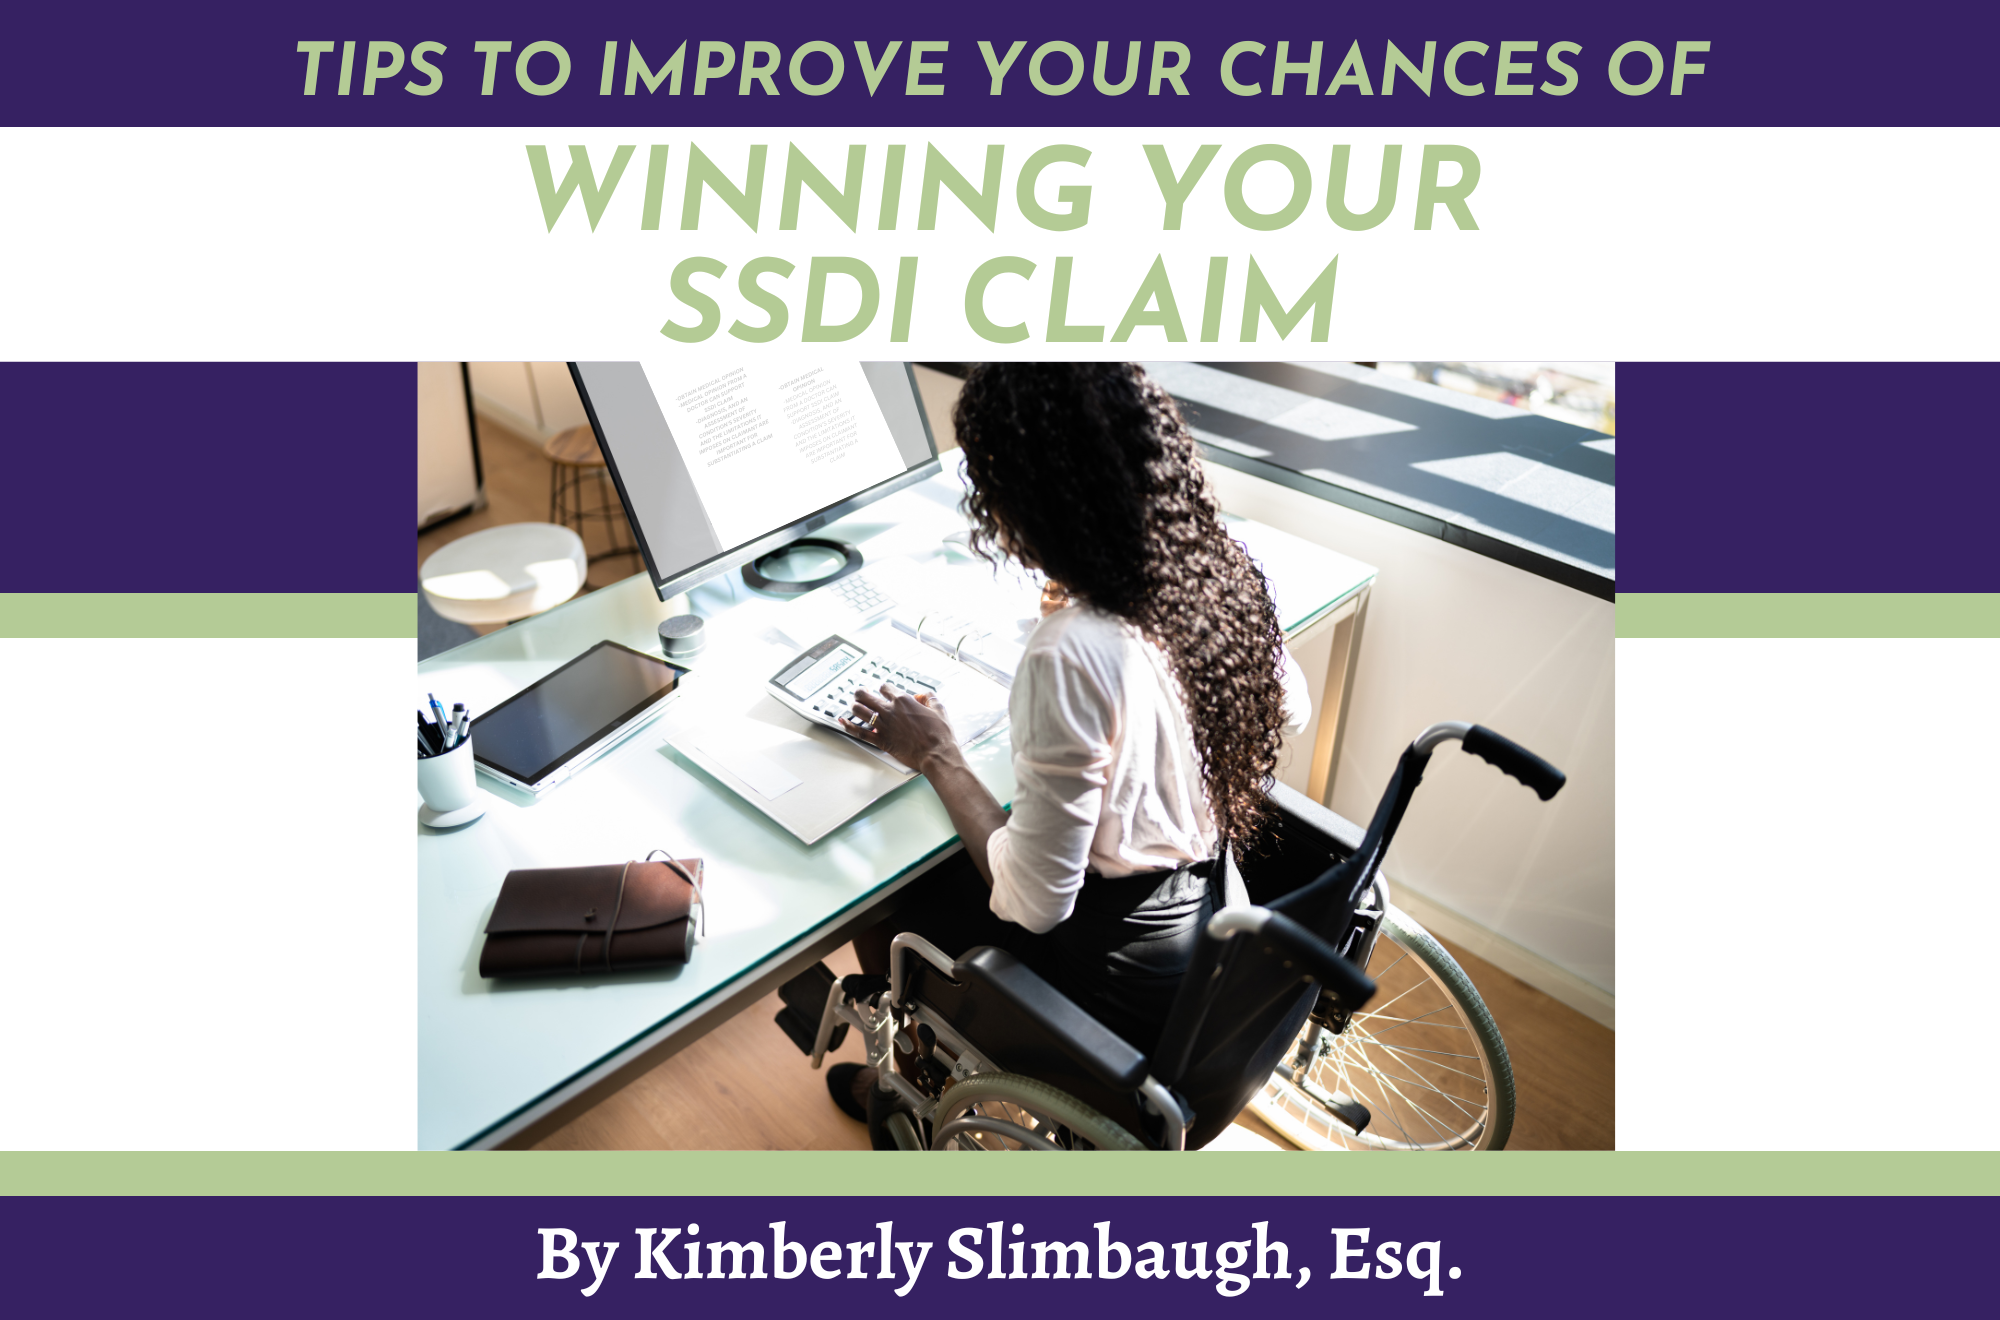 Tips to improve your chances of winning your ssdi claim ebook by kimberly slimbaugh, esq, mcv law syracuse, ny